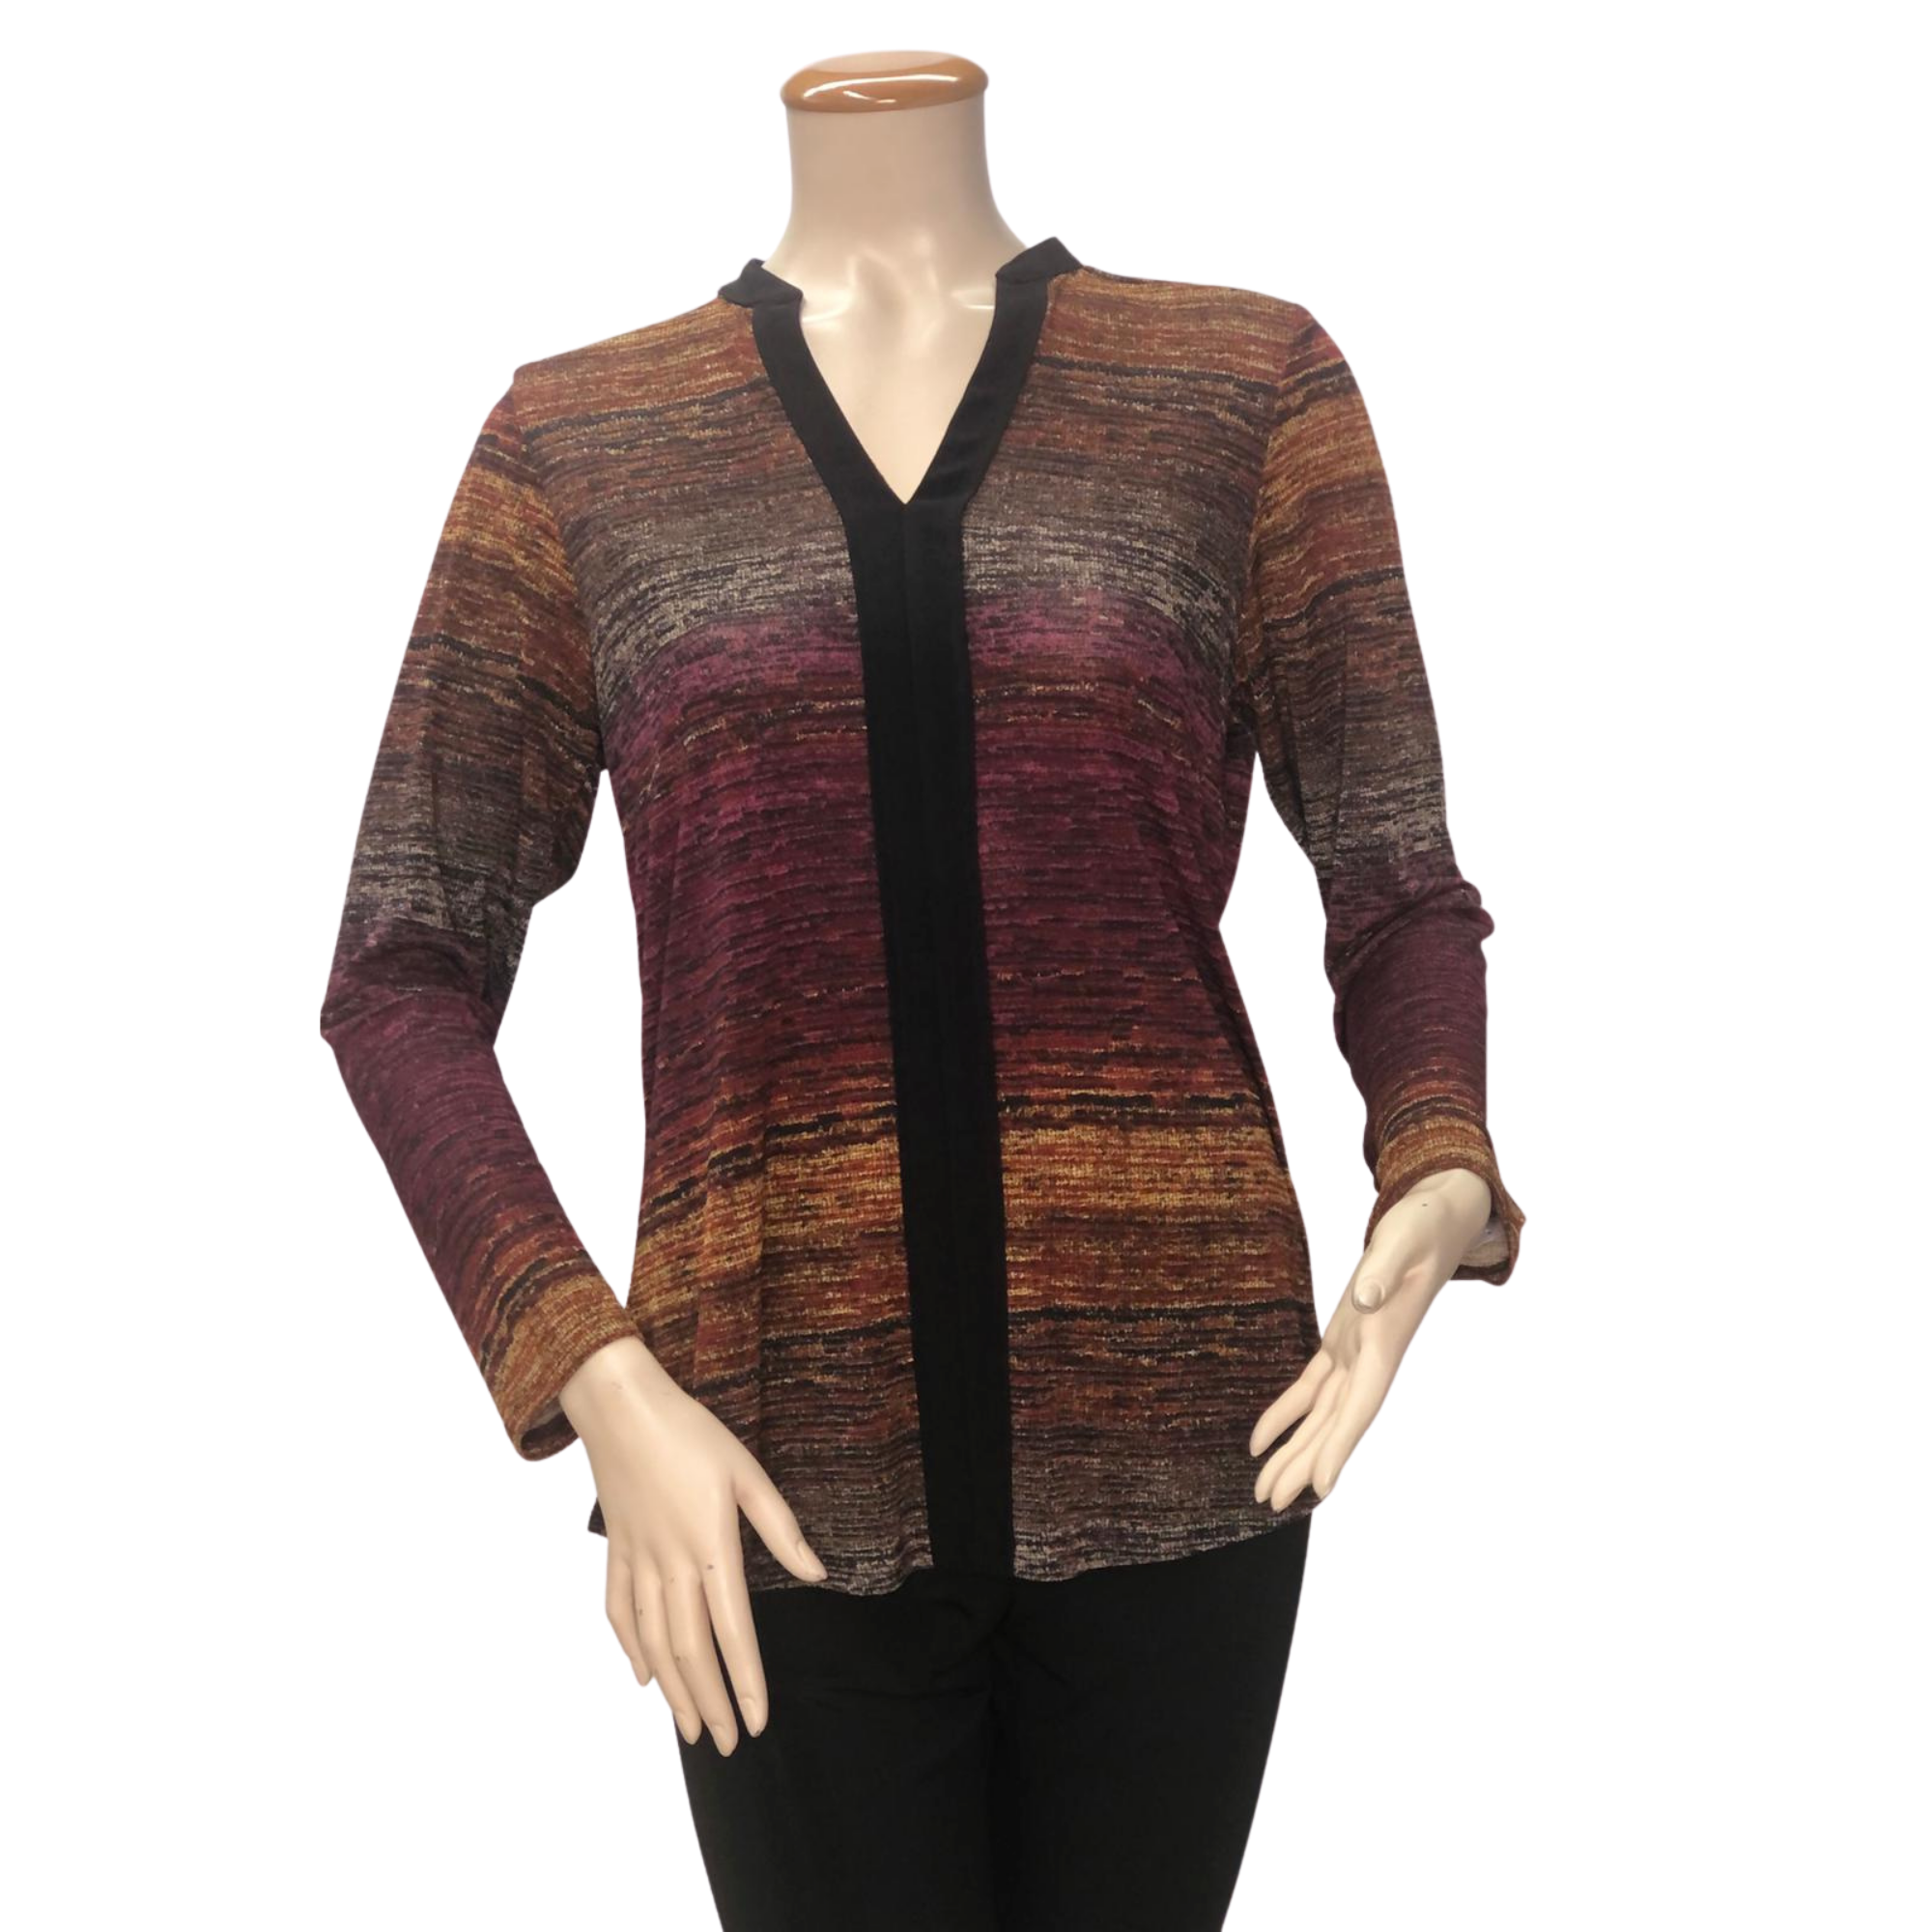 FASHQUE - LONG SLEEVE SPLIT-NECK PULLOVER TOP WITH PLACKET TRIM - T531